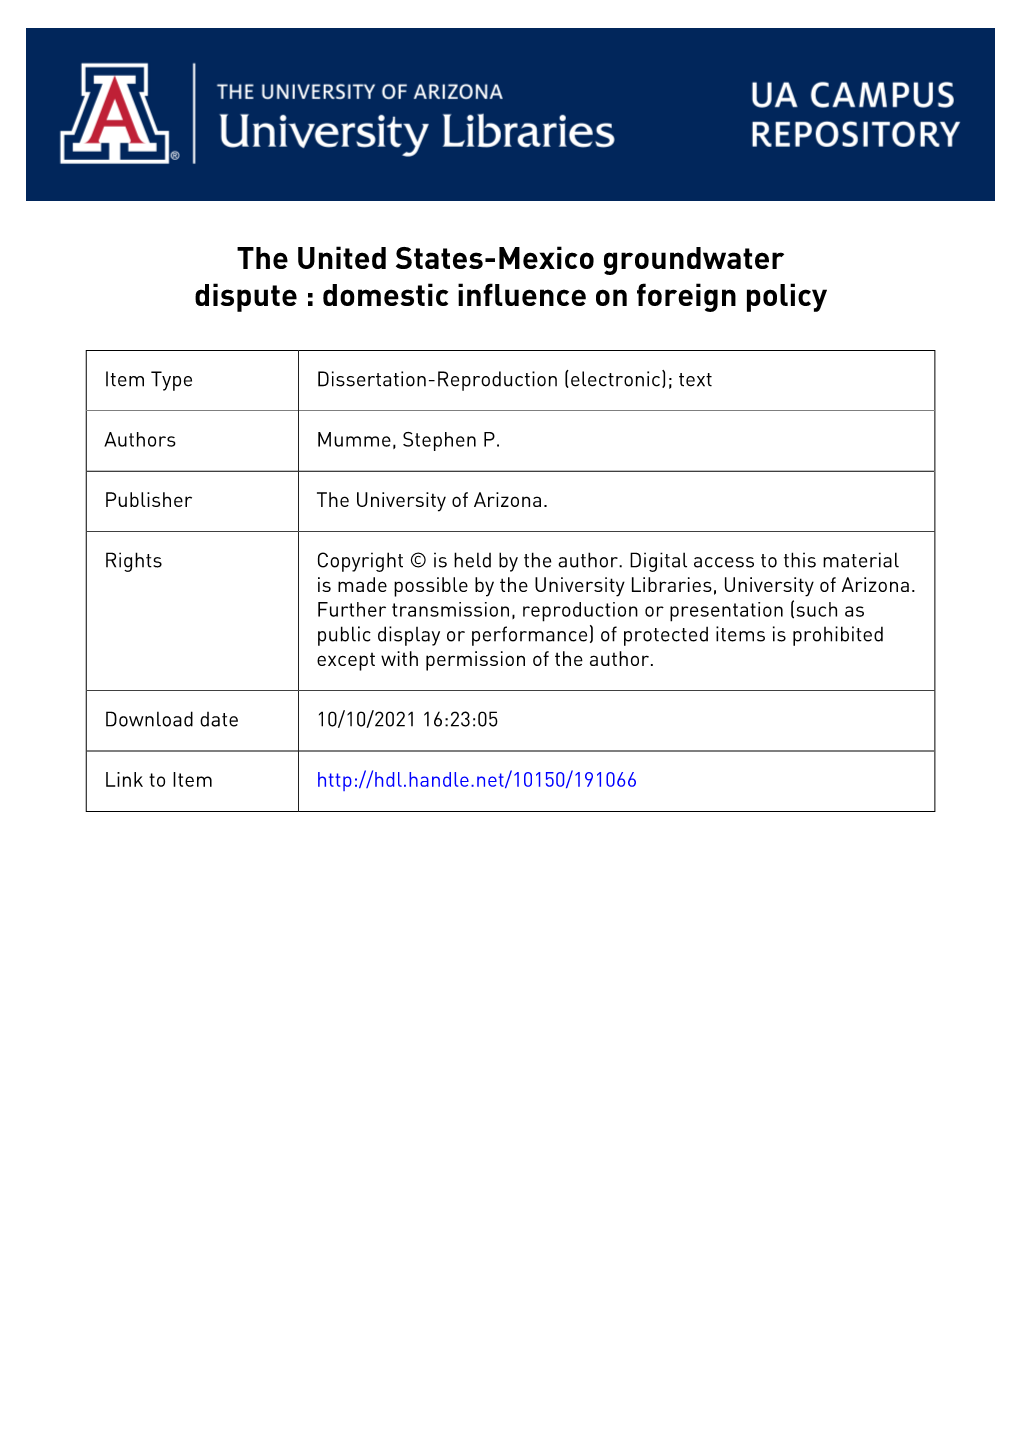 THE UNITED STATES-MEXICO GROUNDWATER DISPUTE: DOMESTIC INFLUENCE on FOREIGN POLICY by Stephen Paul Mumme a Dissertation Submitte